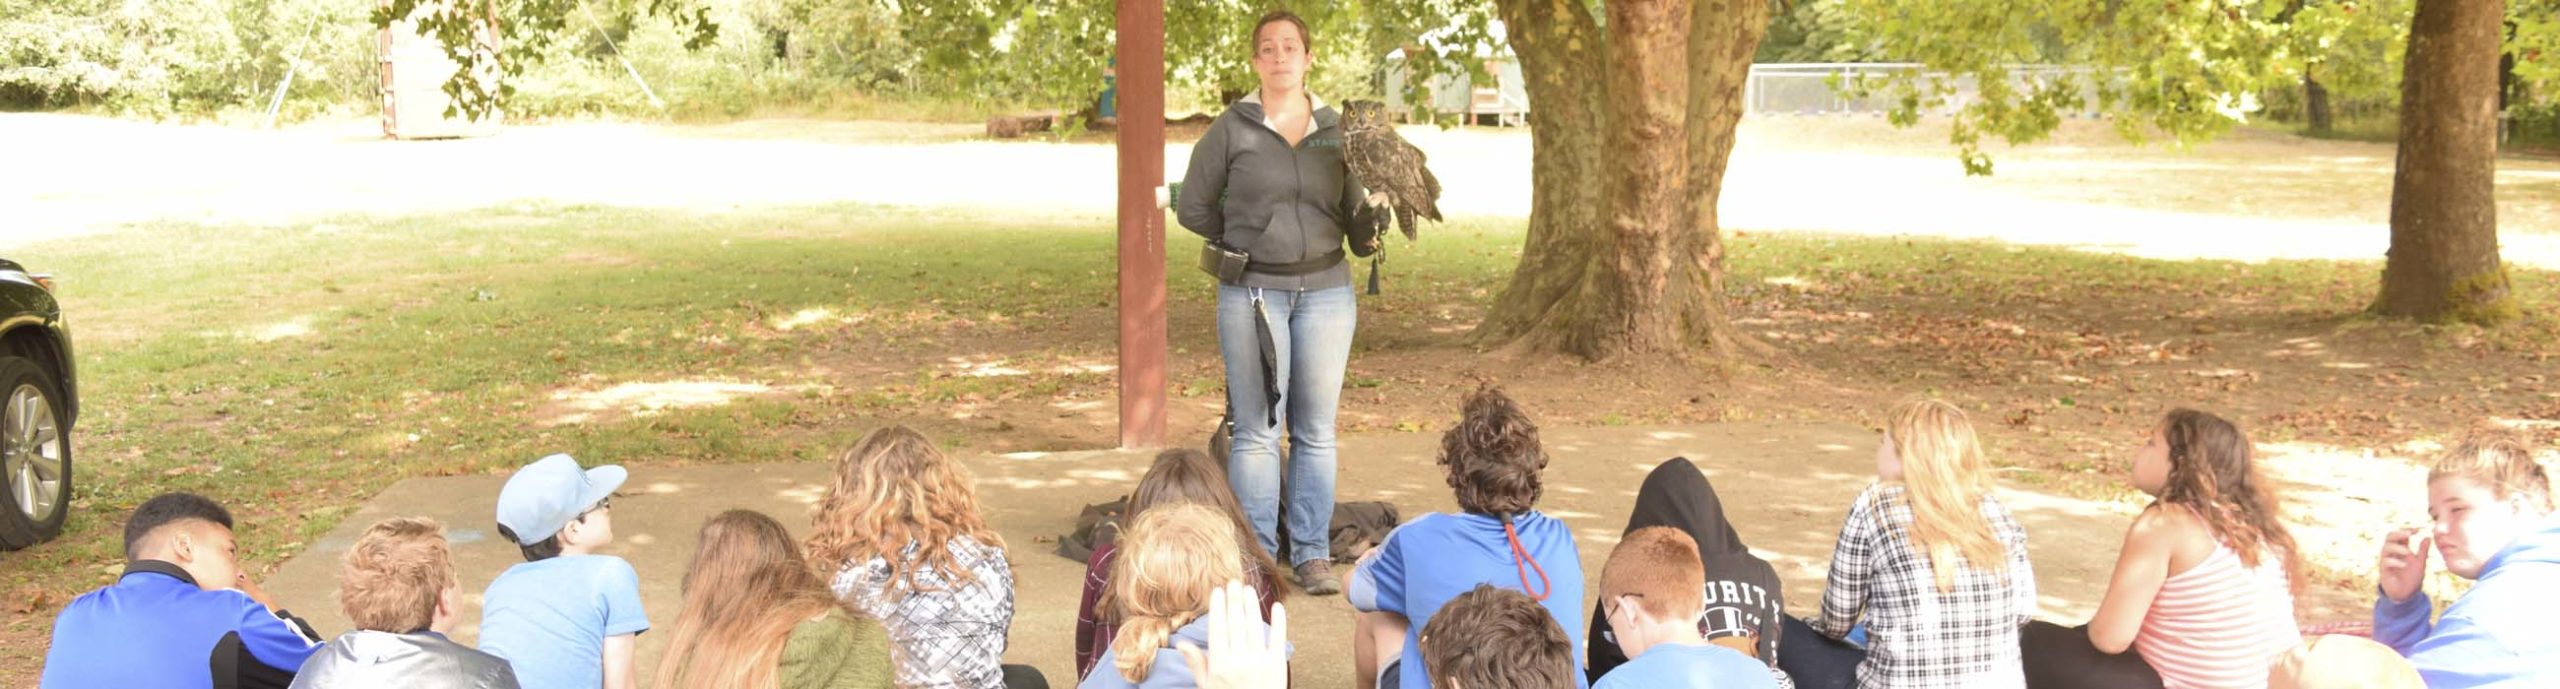 A woman teaching campers about raptors with a live owl on her glove